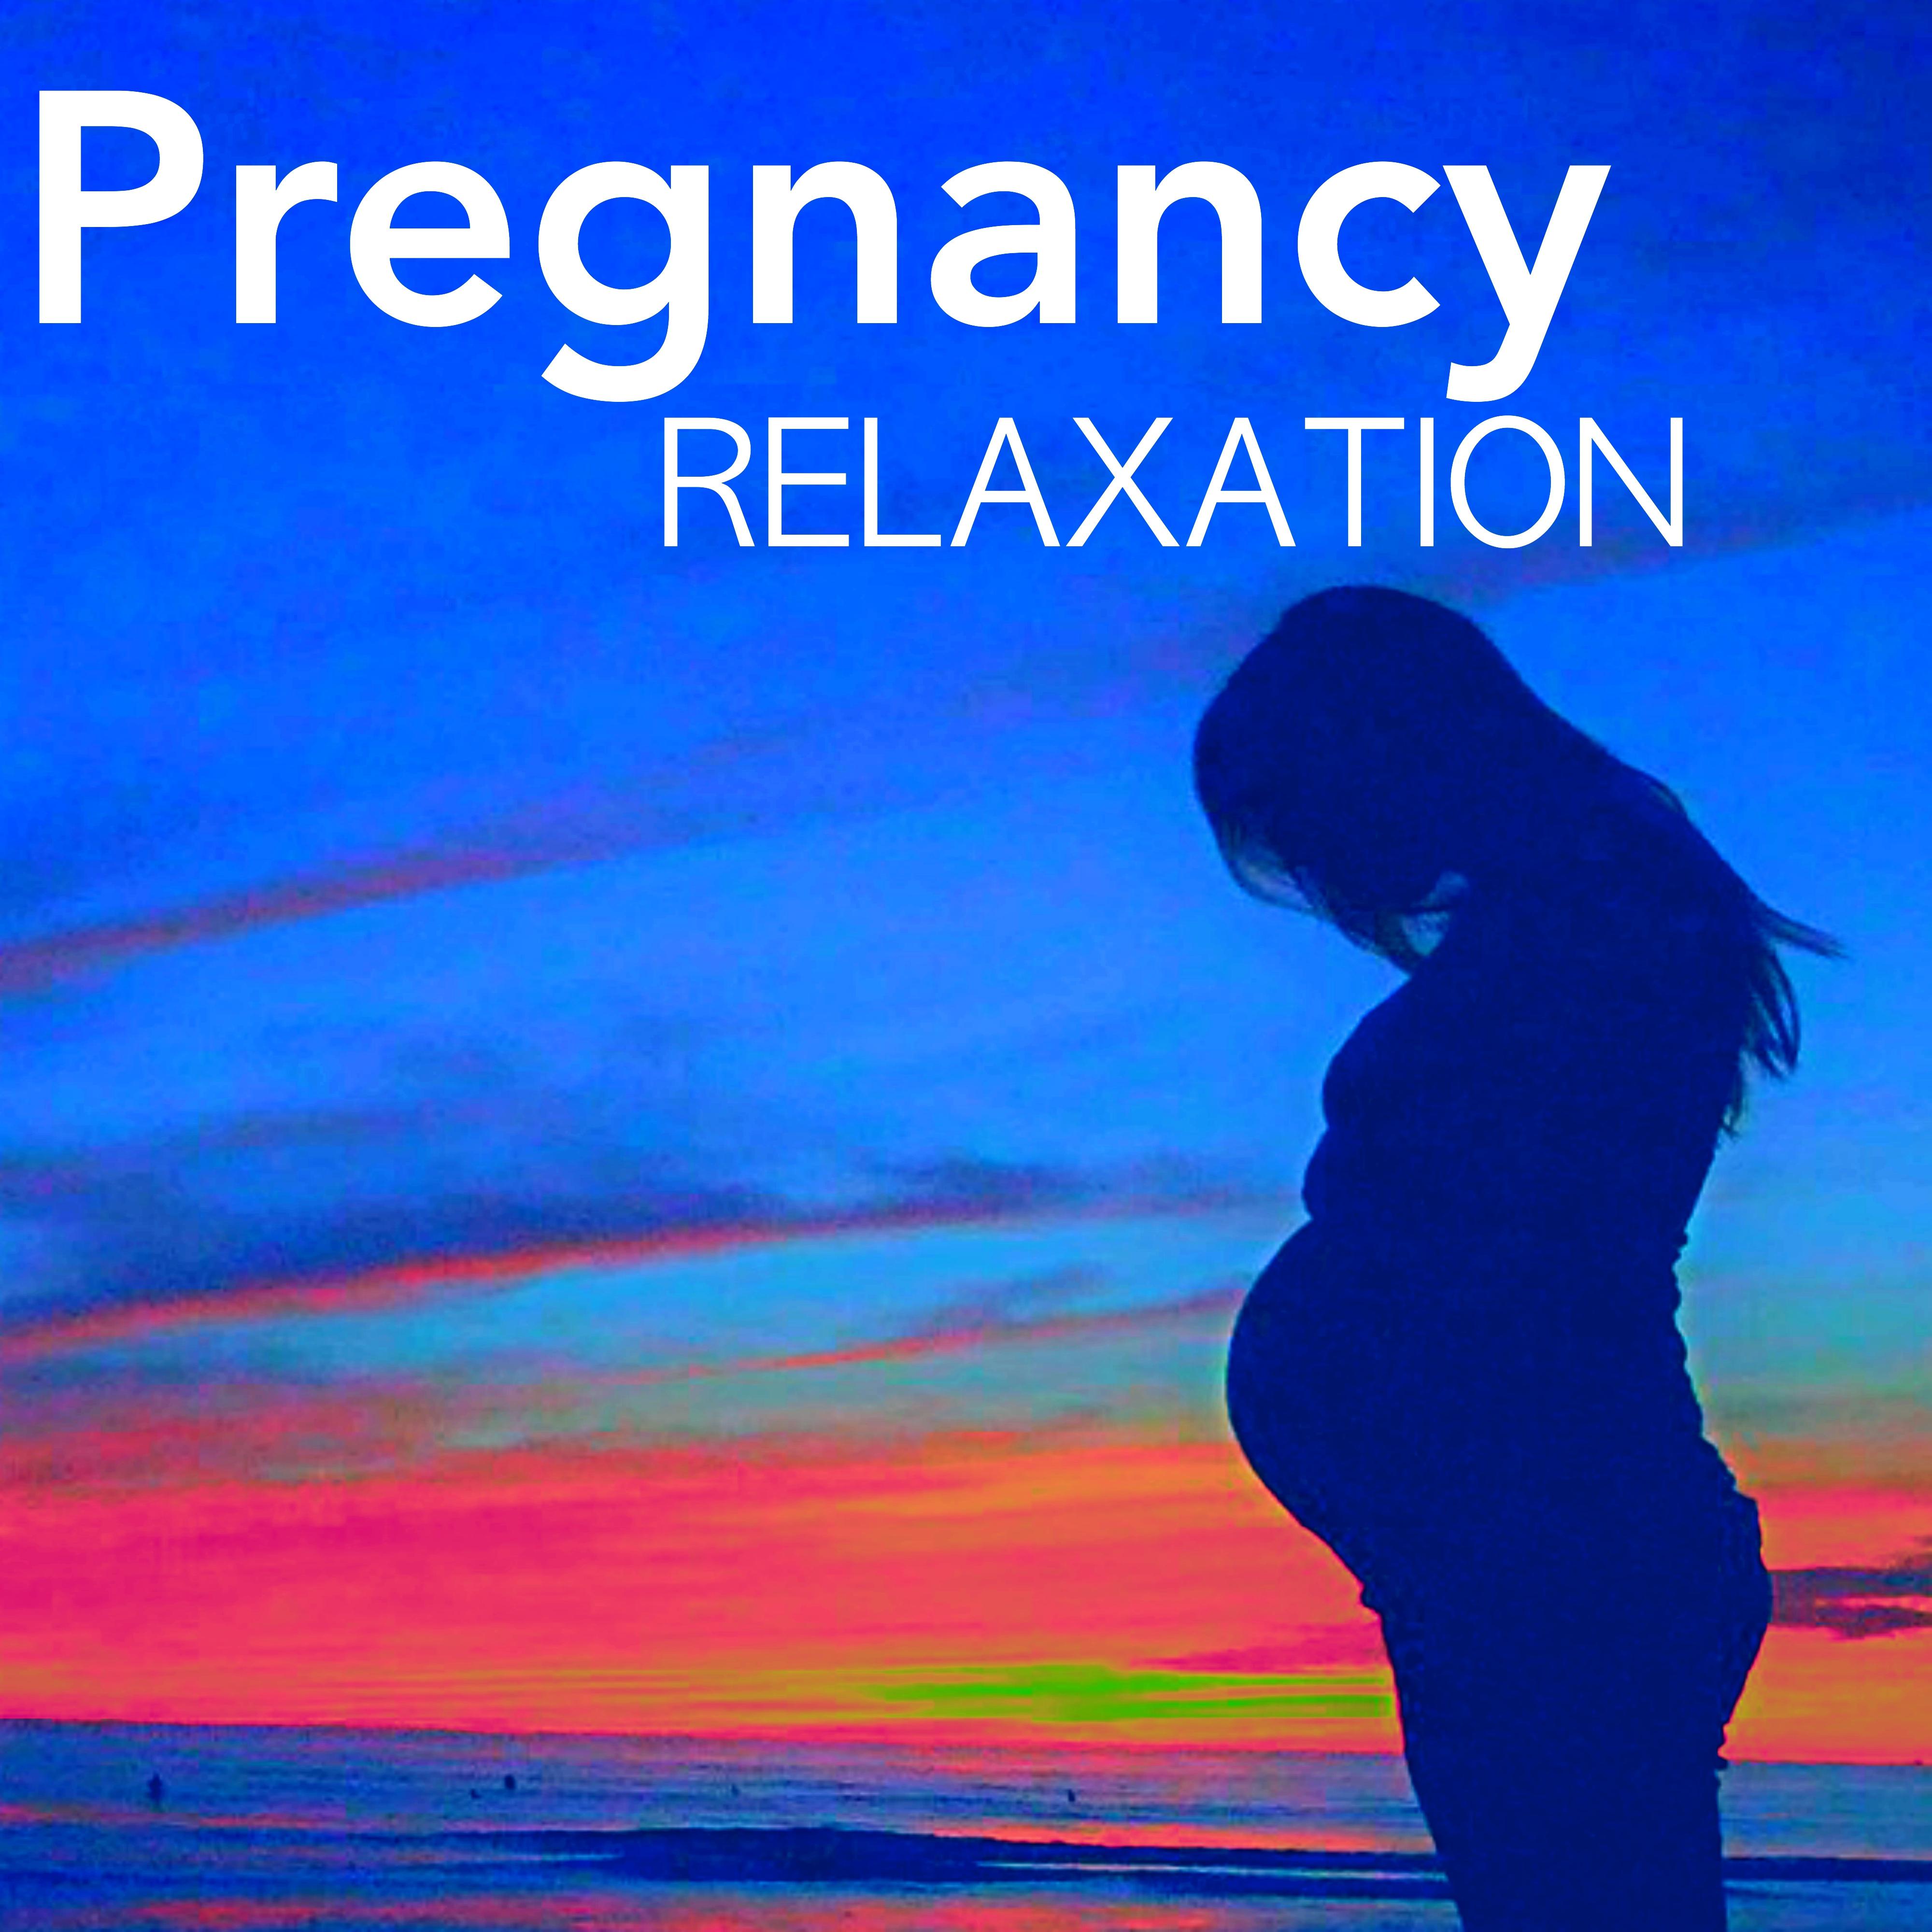 Pregnancy Relaxation - Soothing Relaxing Sound for Pregnant Relaxation and Baby Lull, Calming Music for Sweet dreams and Positive Energy